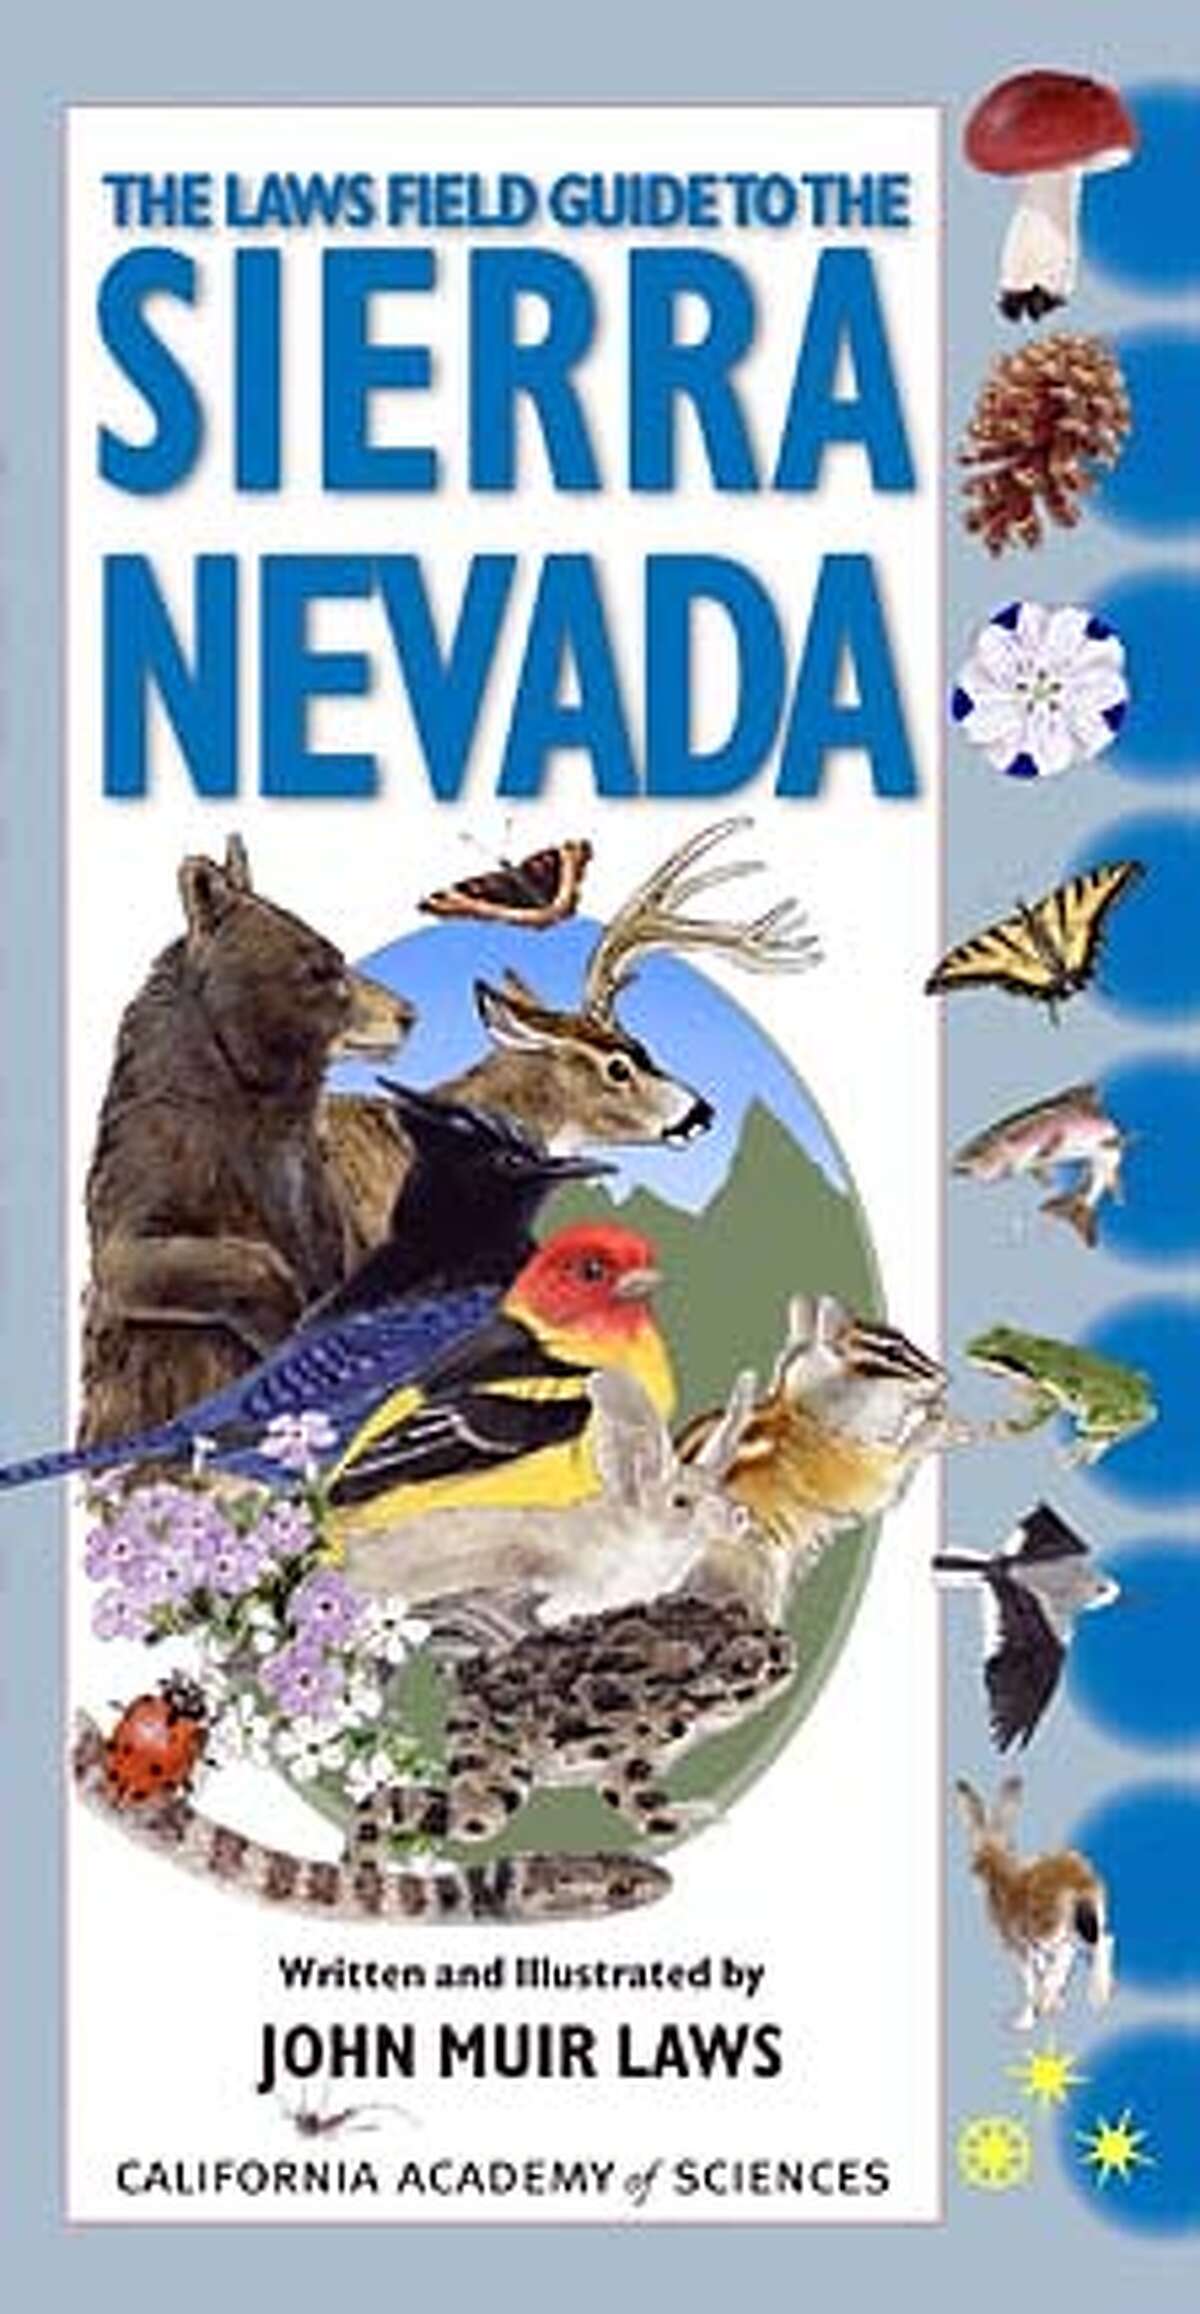 Laws' Field Guide to the Sierra Nevada"